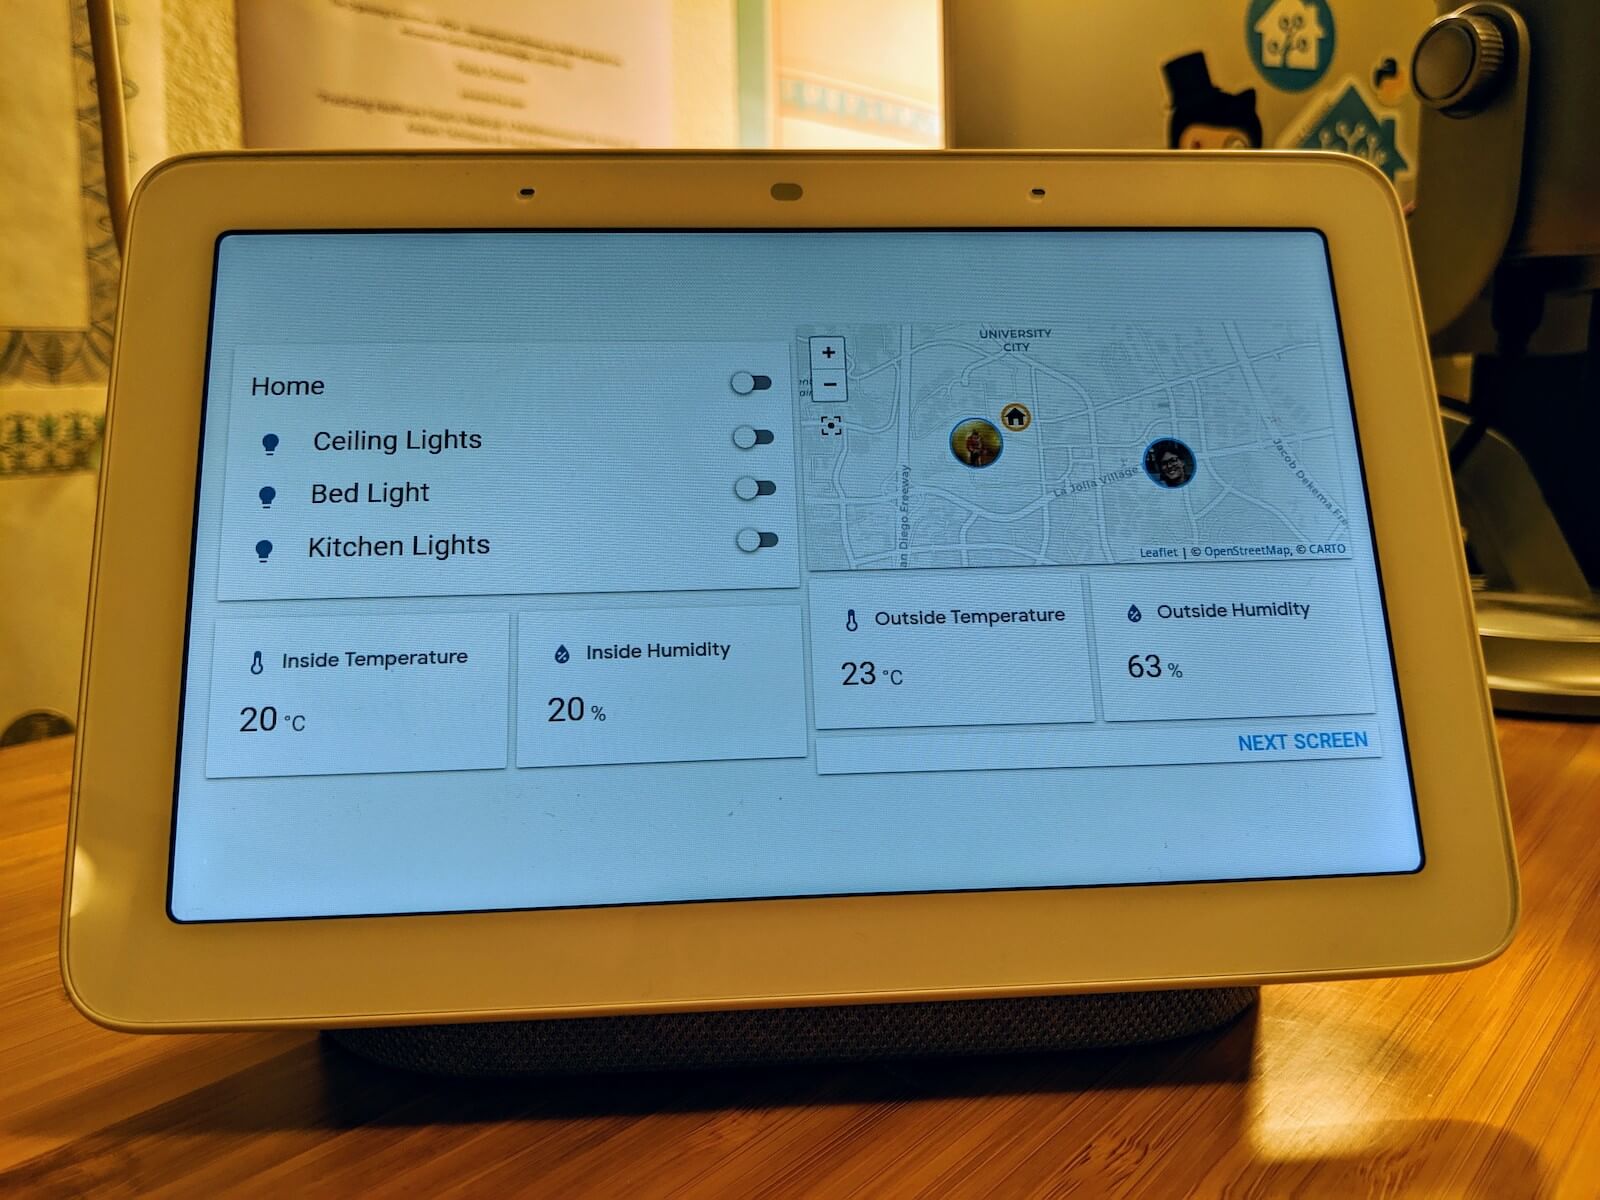 Photo of a Google Nest Hub running the Home Assistant Cast interface.